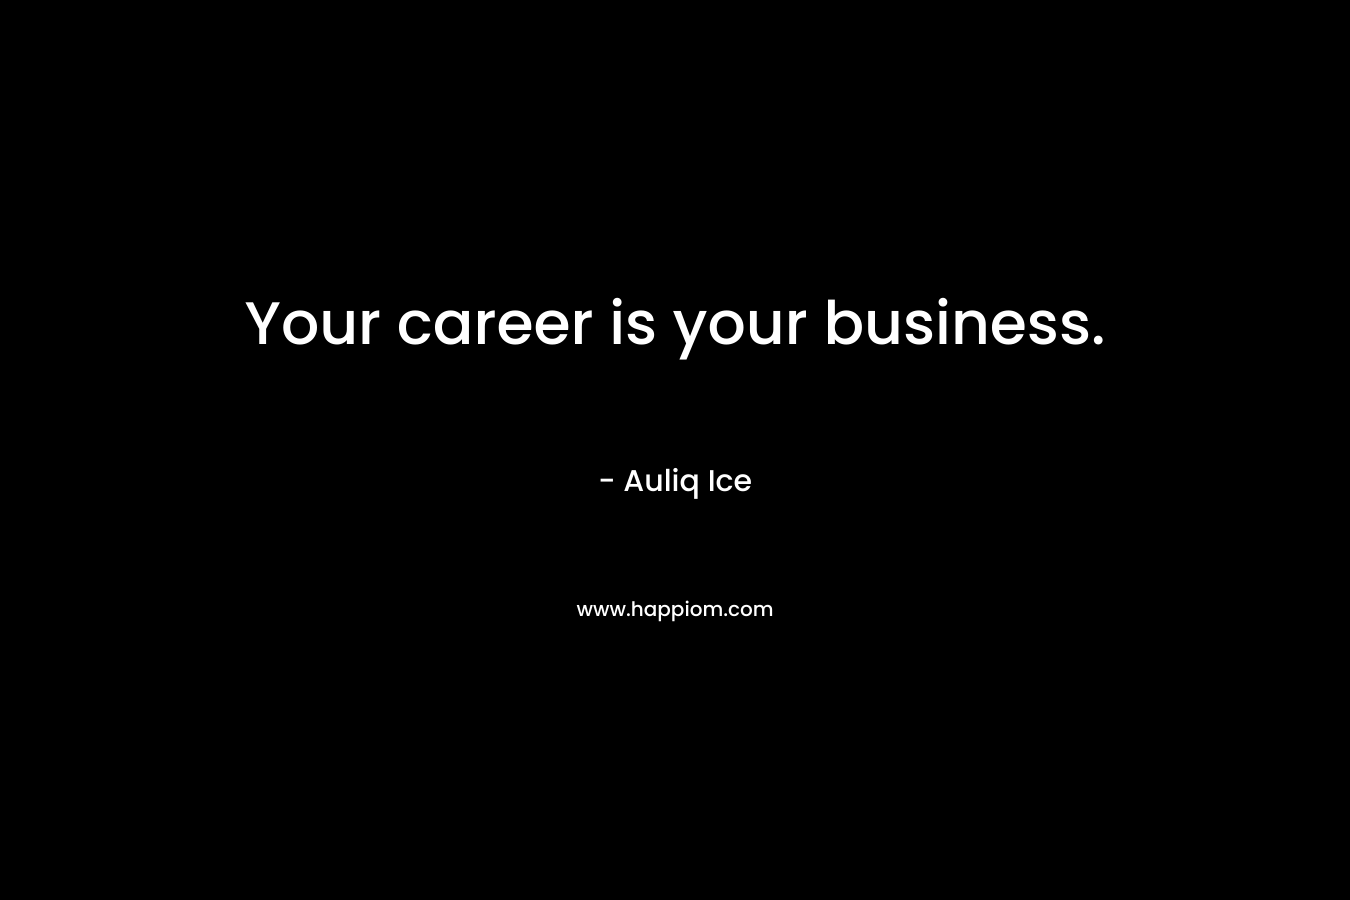 Your career is your business. – Auliq Ice